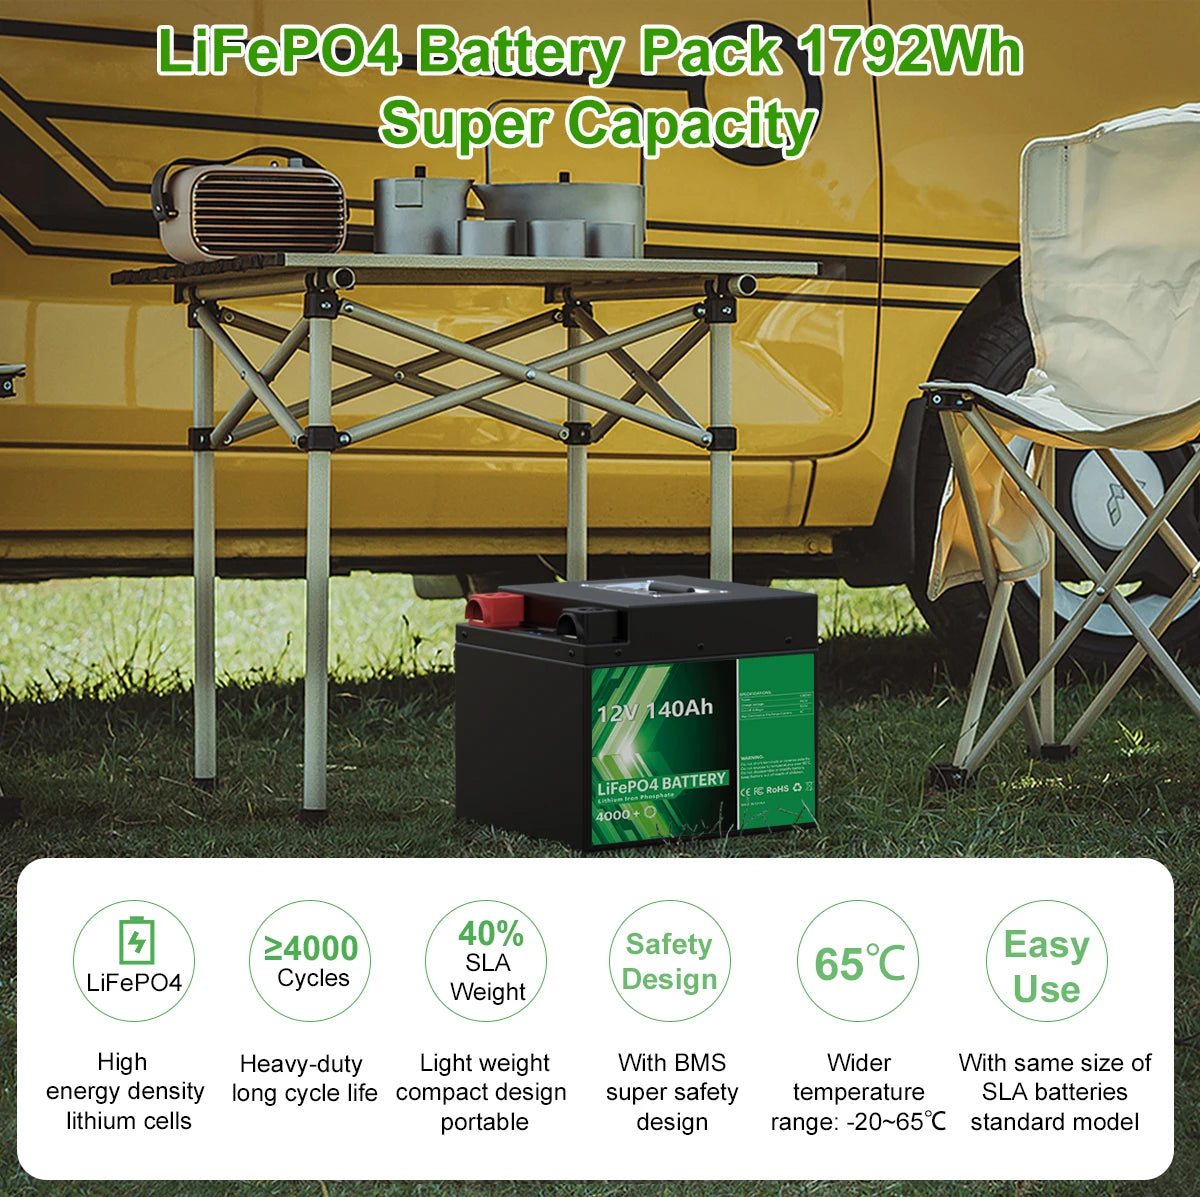 12V 140Ah LiFePO4 Battery, High-capacity lithium-ion battery pack for safe and efficient power storage with compact design.